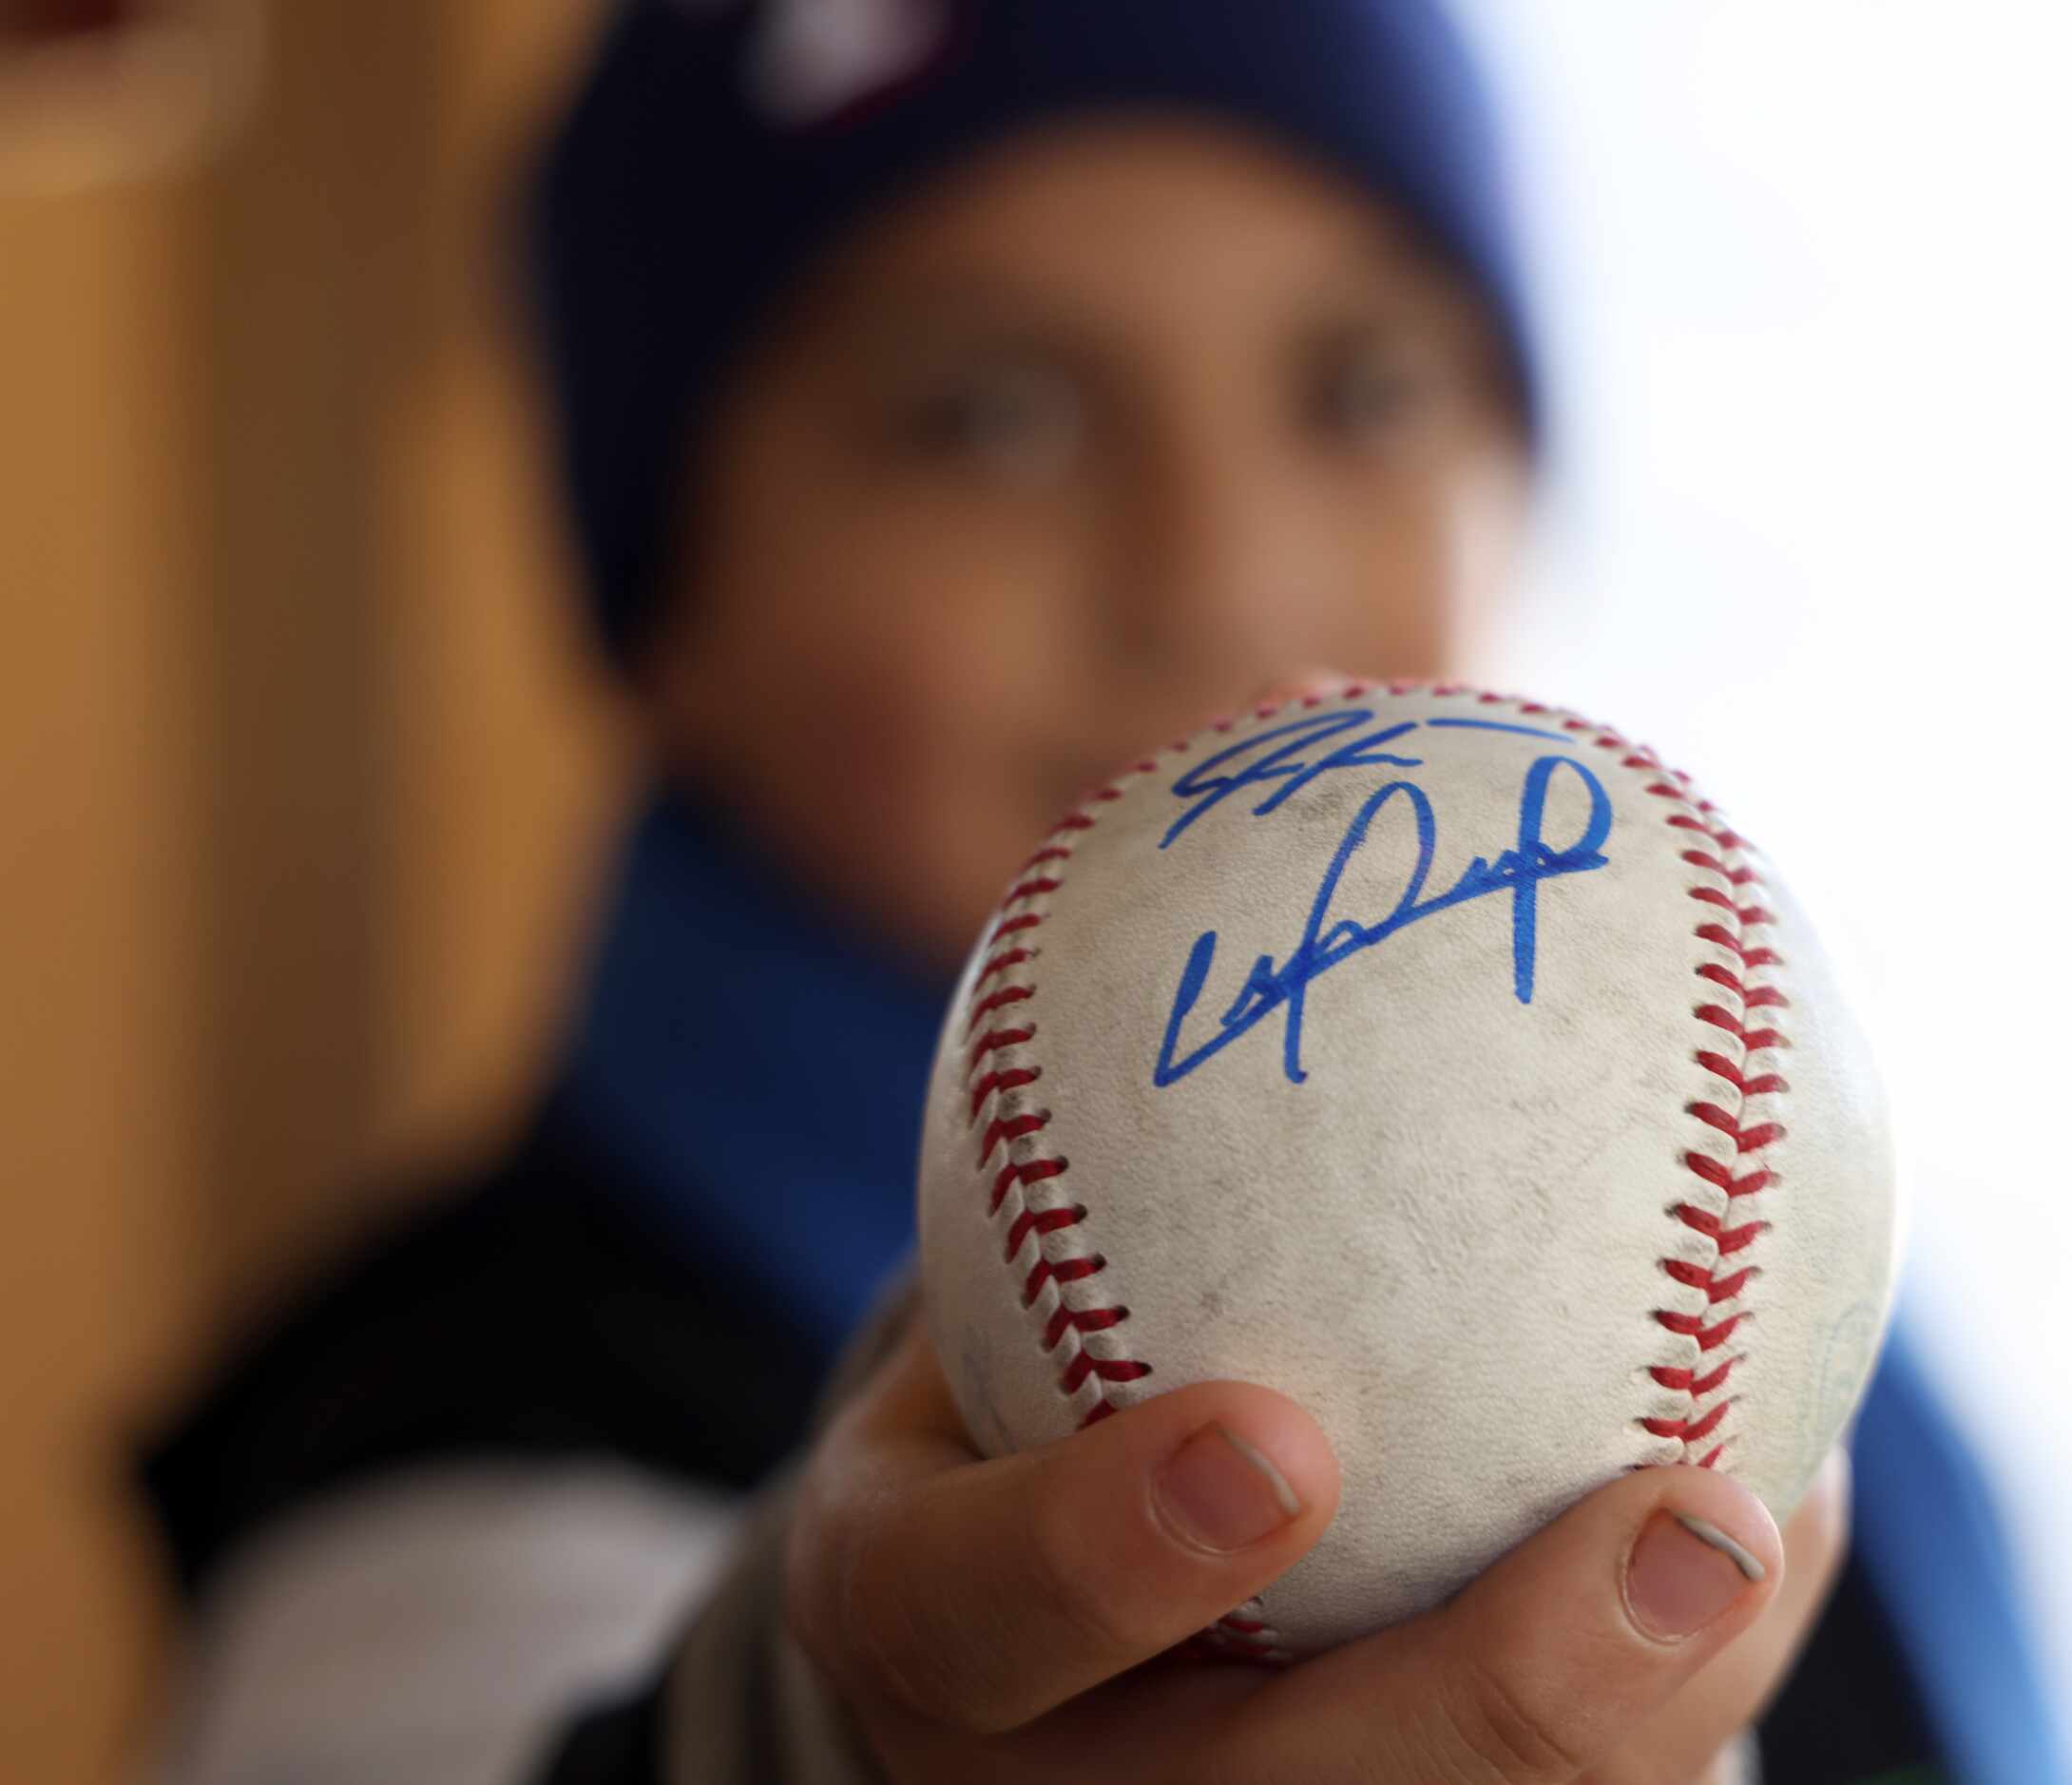 Texas Rangers fan Pablo Sosa, 9, poses after getting autographs from players on his souvenir...